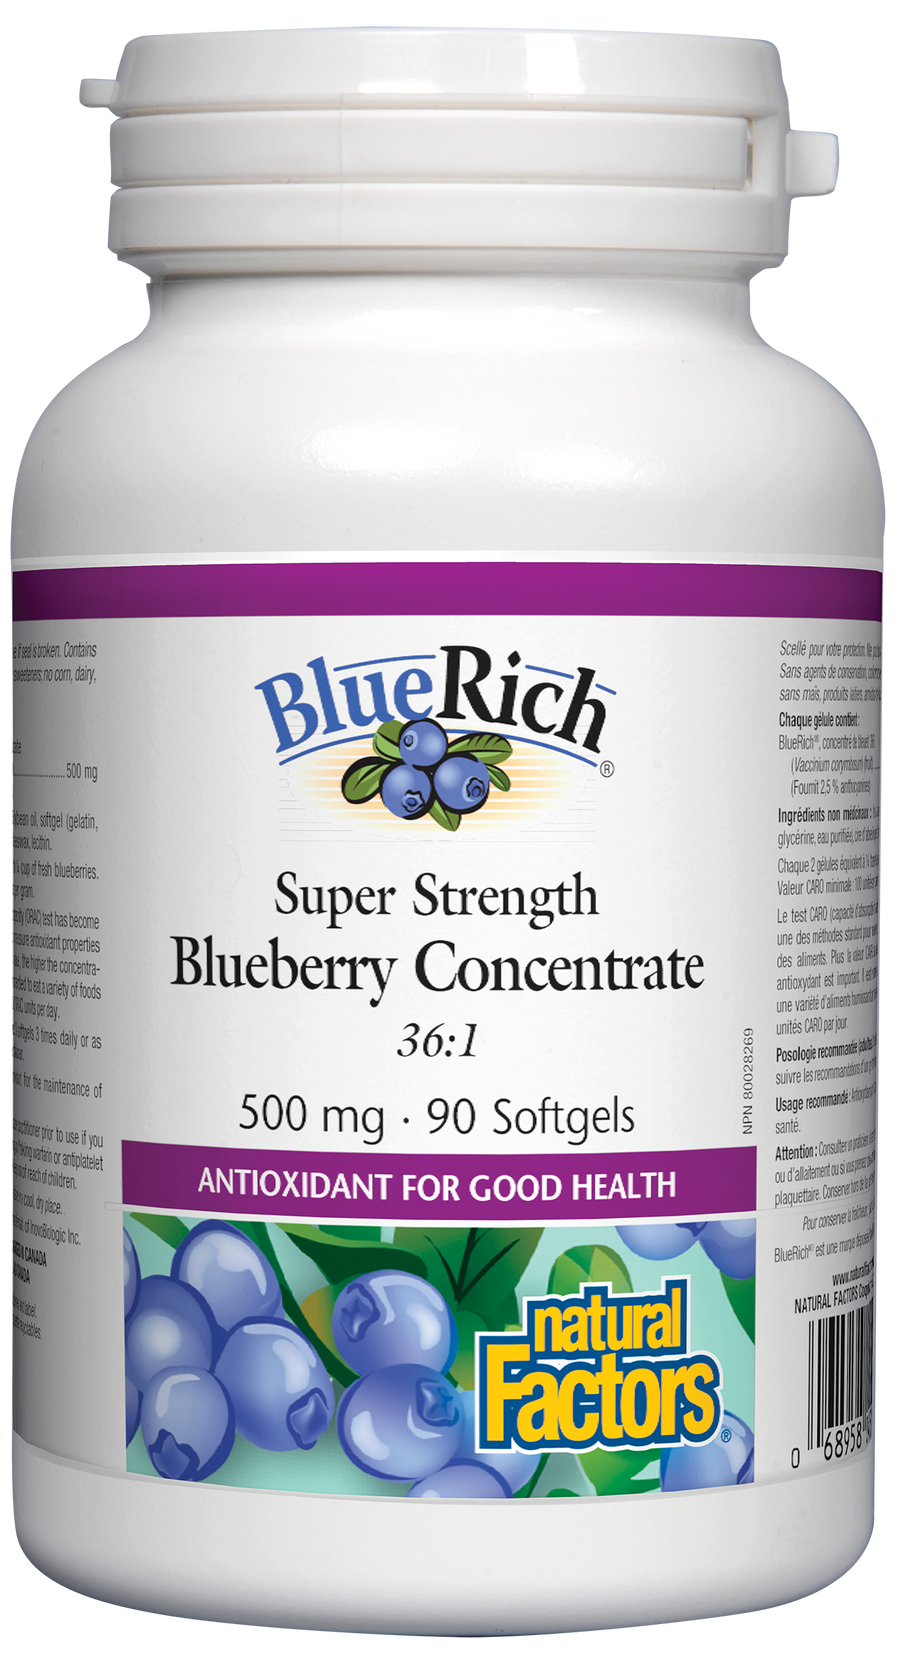 Natural Factors BlueRich Super Strength Blueberry Concentrate 500mg 90 Softgels